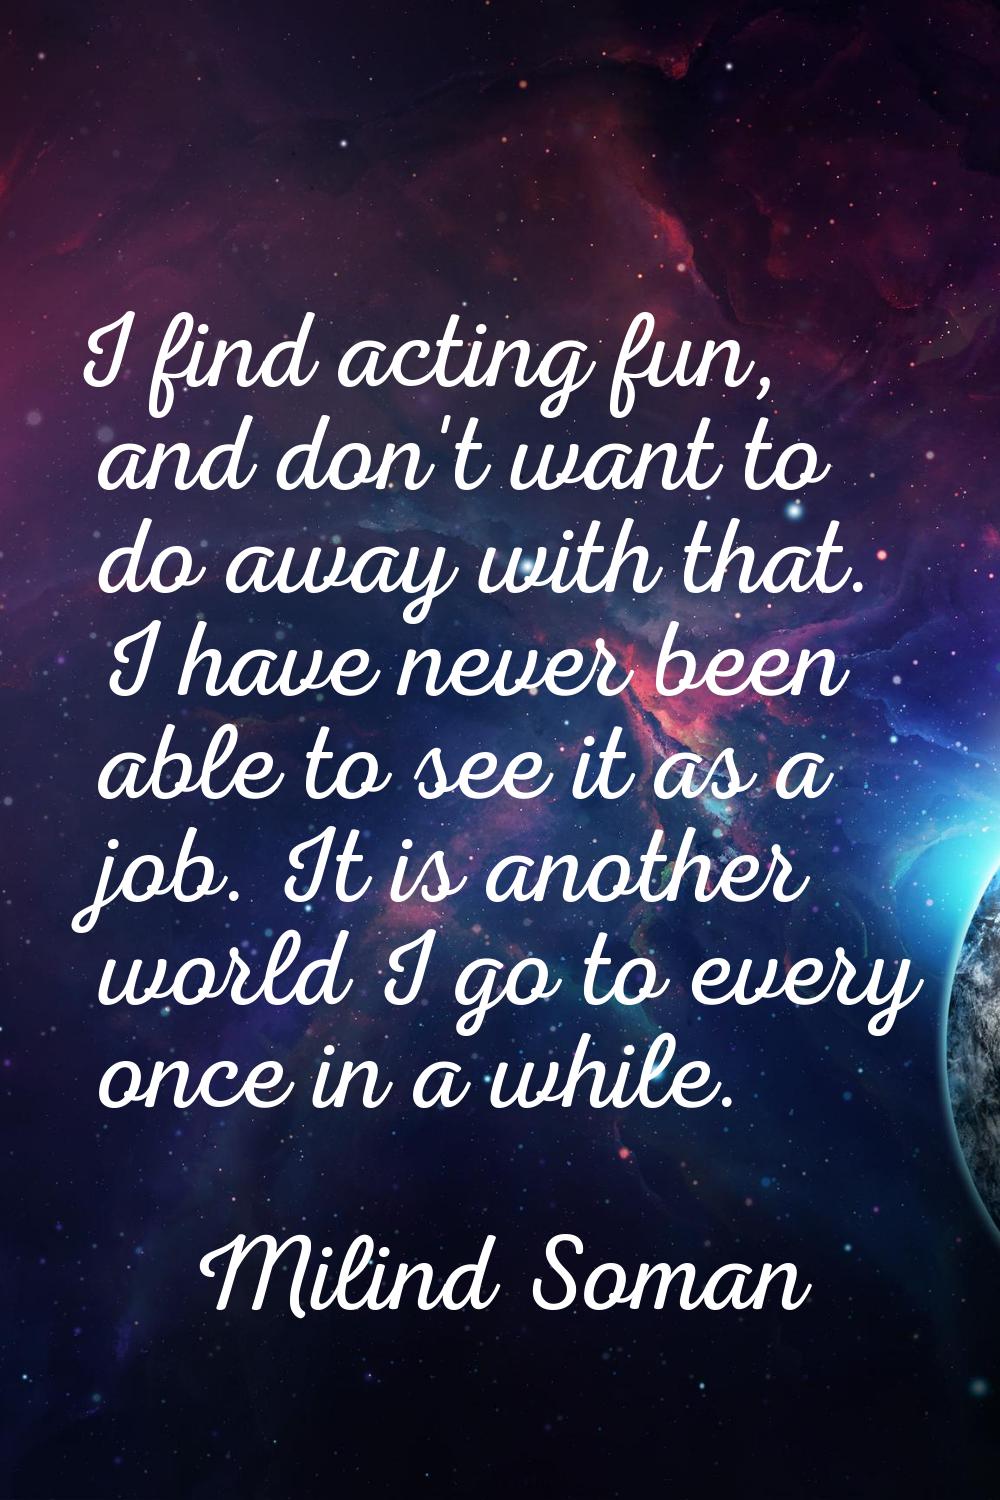 I find acting fun, and don't want to do away with that. I have never been able to see it as a job. 